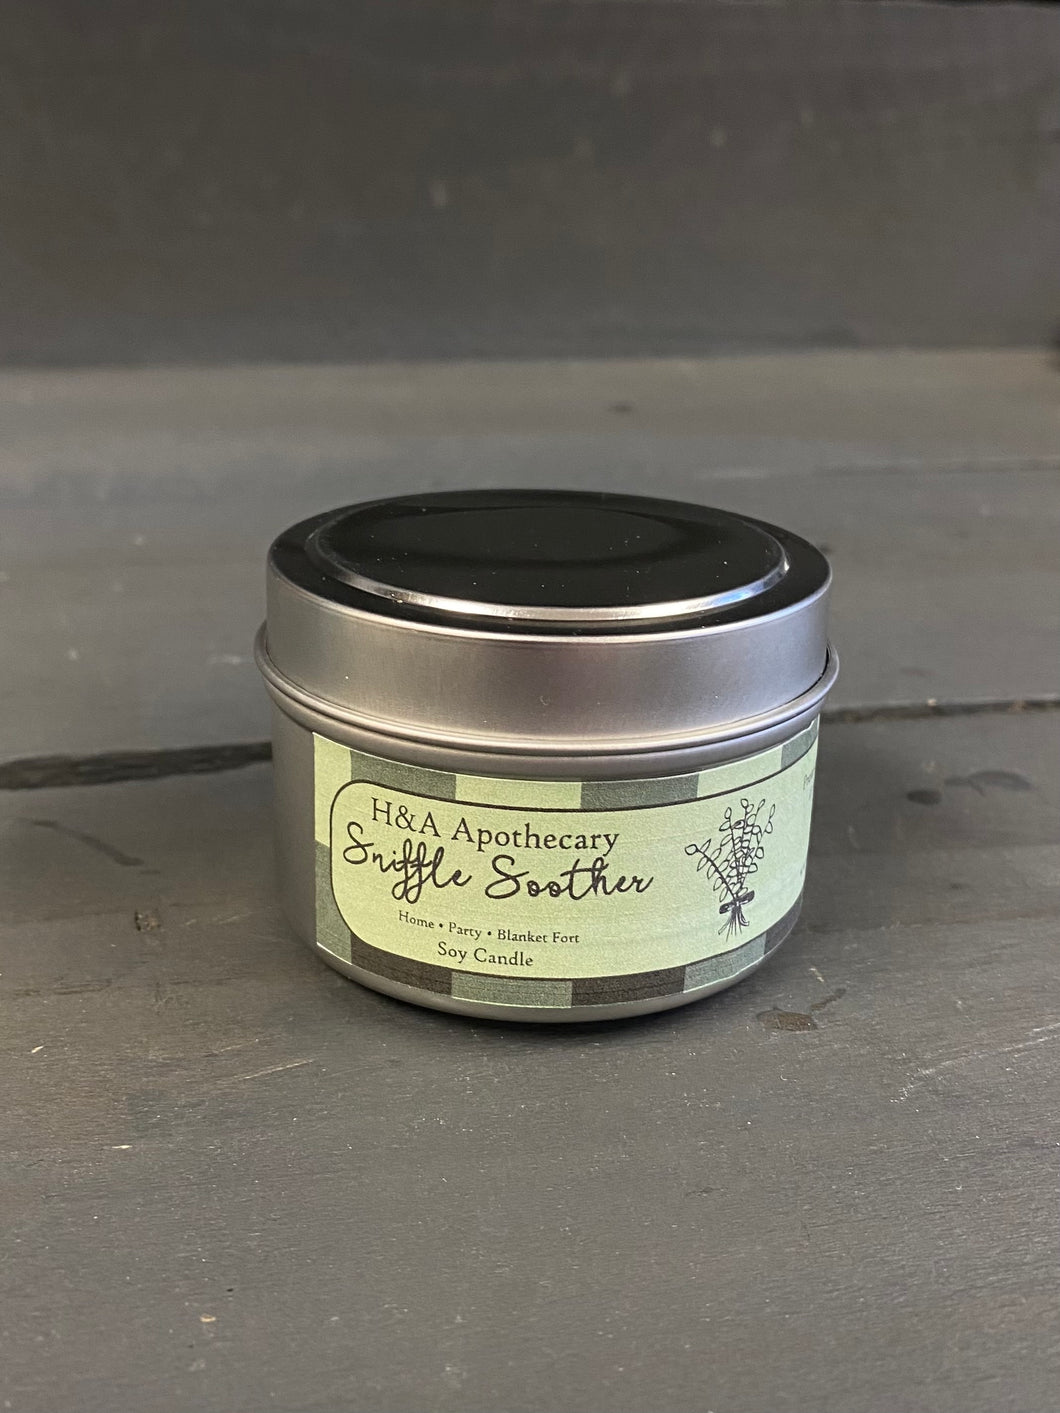 H&A Apothecary Sniffle Soother Soy Candle